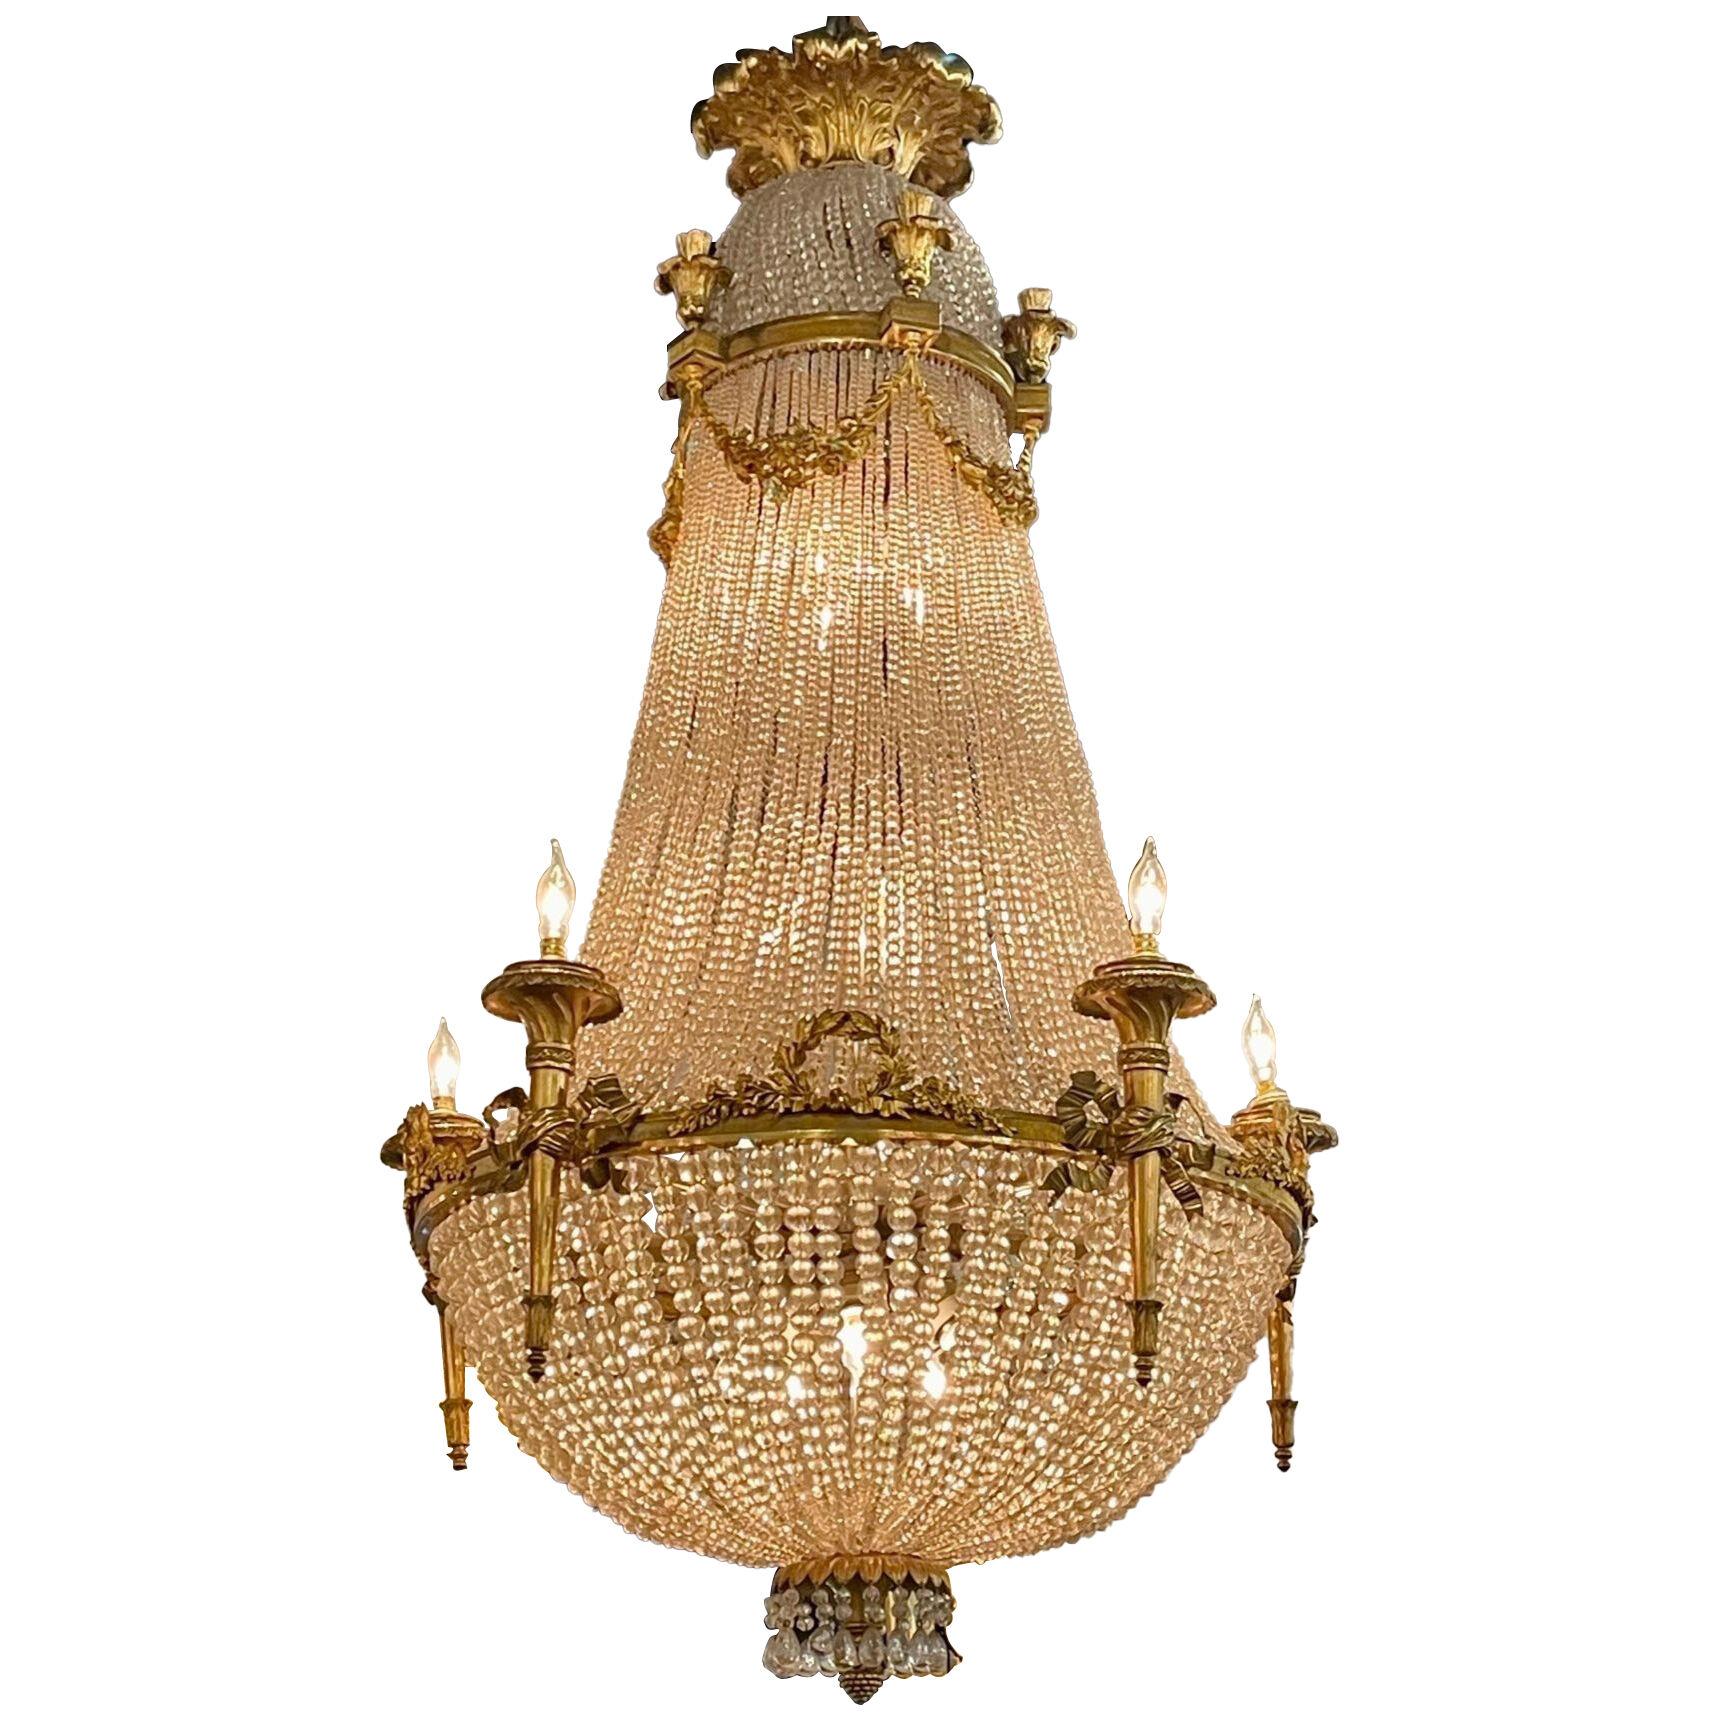 19th Century French Louis XVI Gilt Bronze and Beaded Basket Chandelier